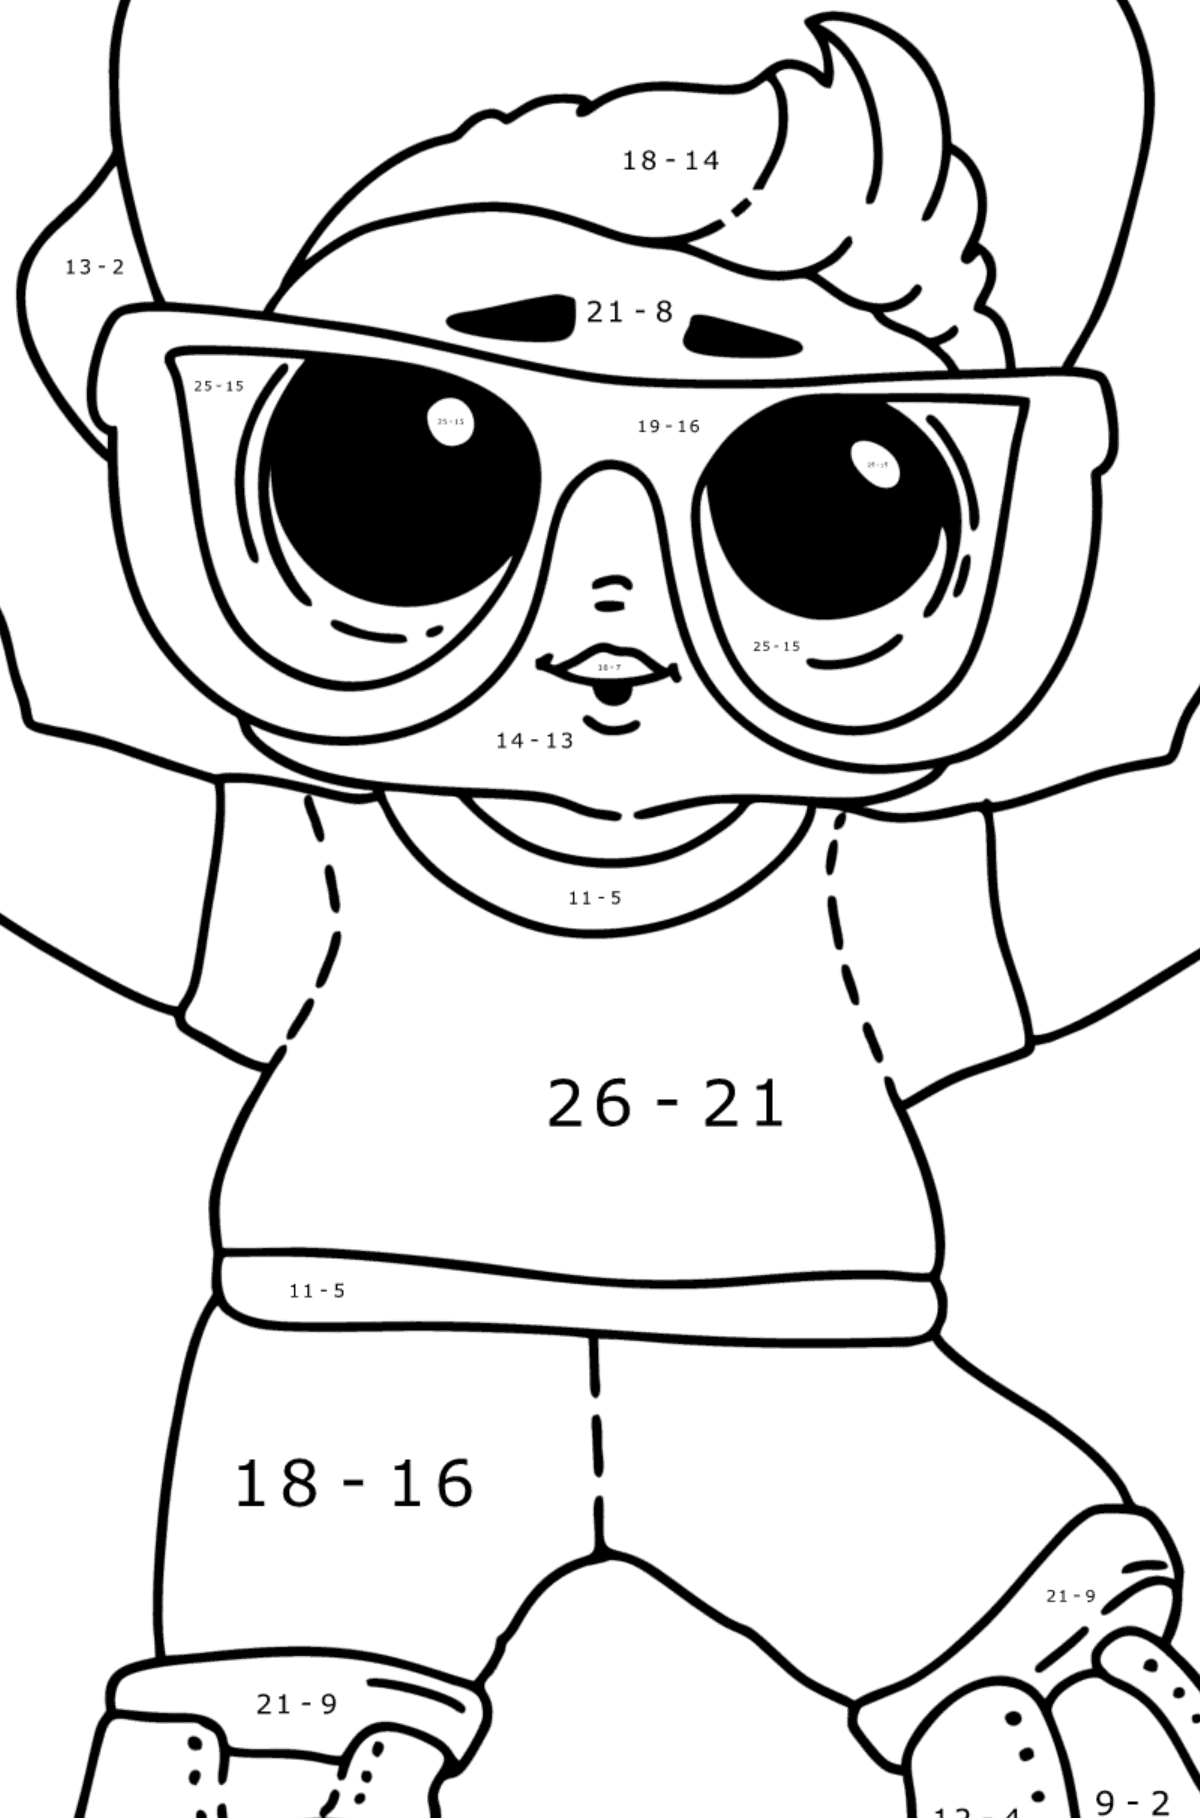 Coloring page LOL boy Next Door - Math Coloring - Subtraction for Kids